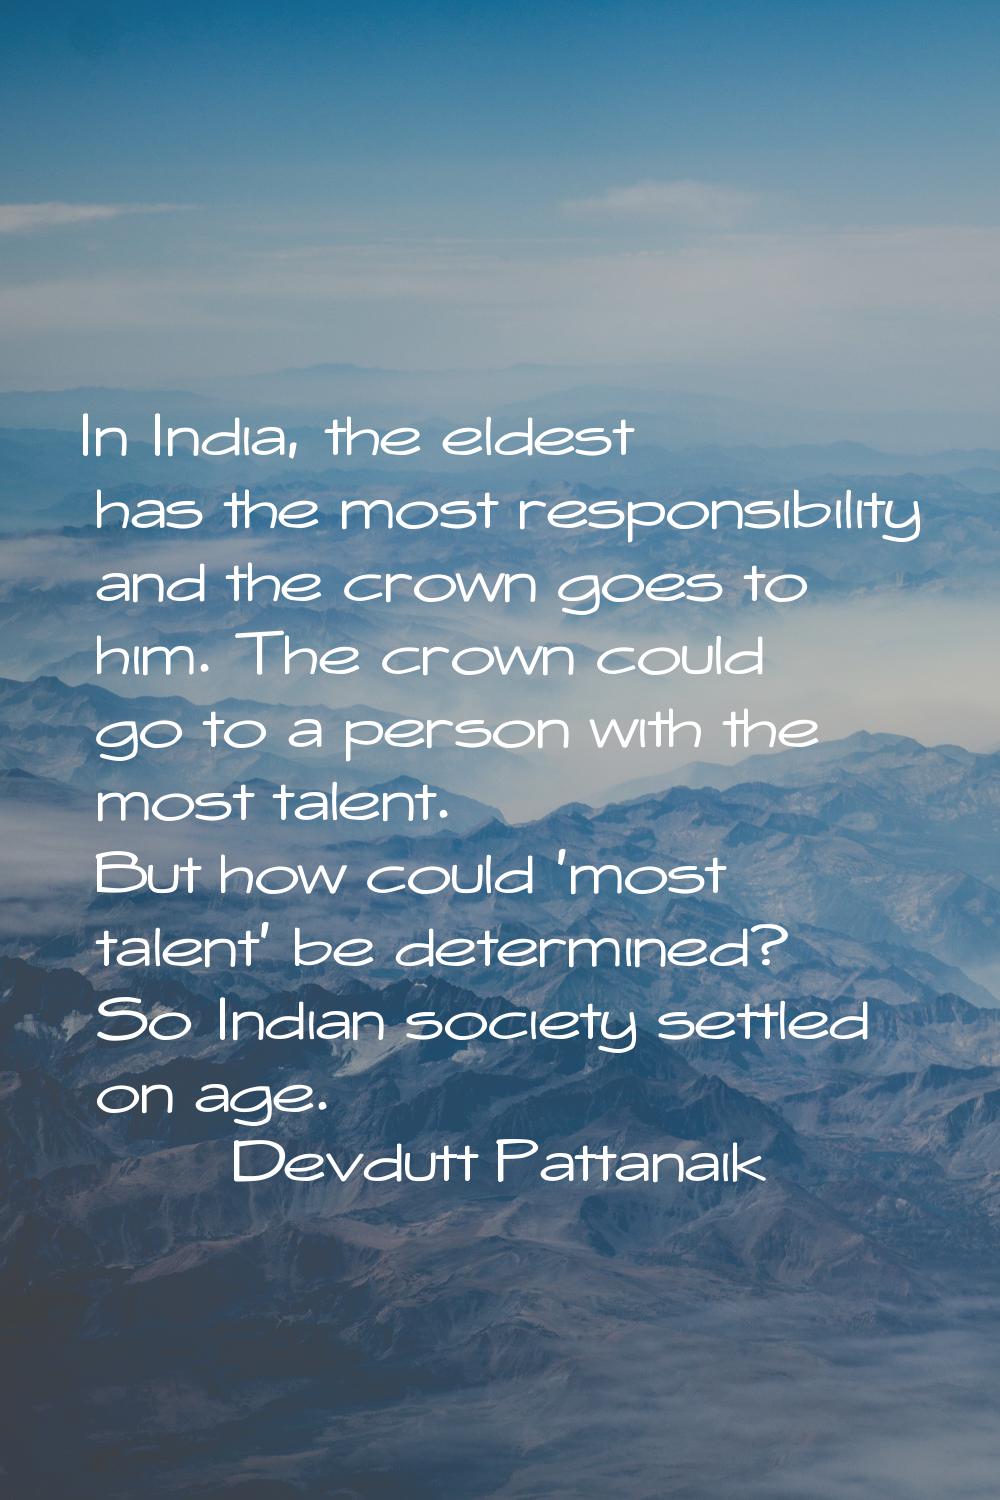 In India, the eldest has the most responsibility and the crown goes to him. The crown could go to a